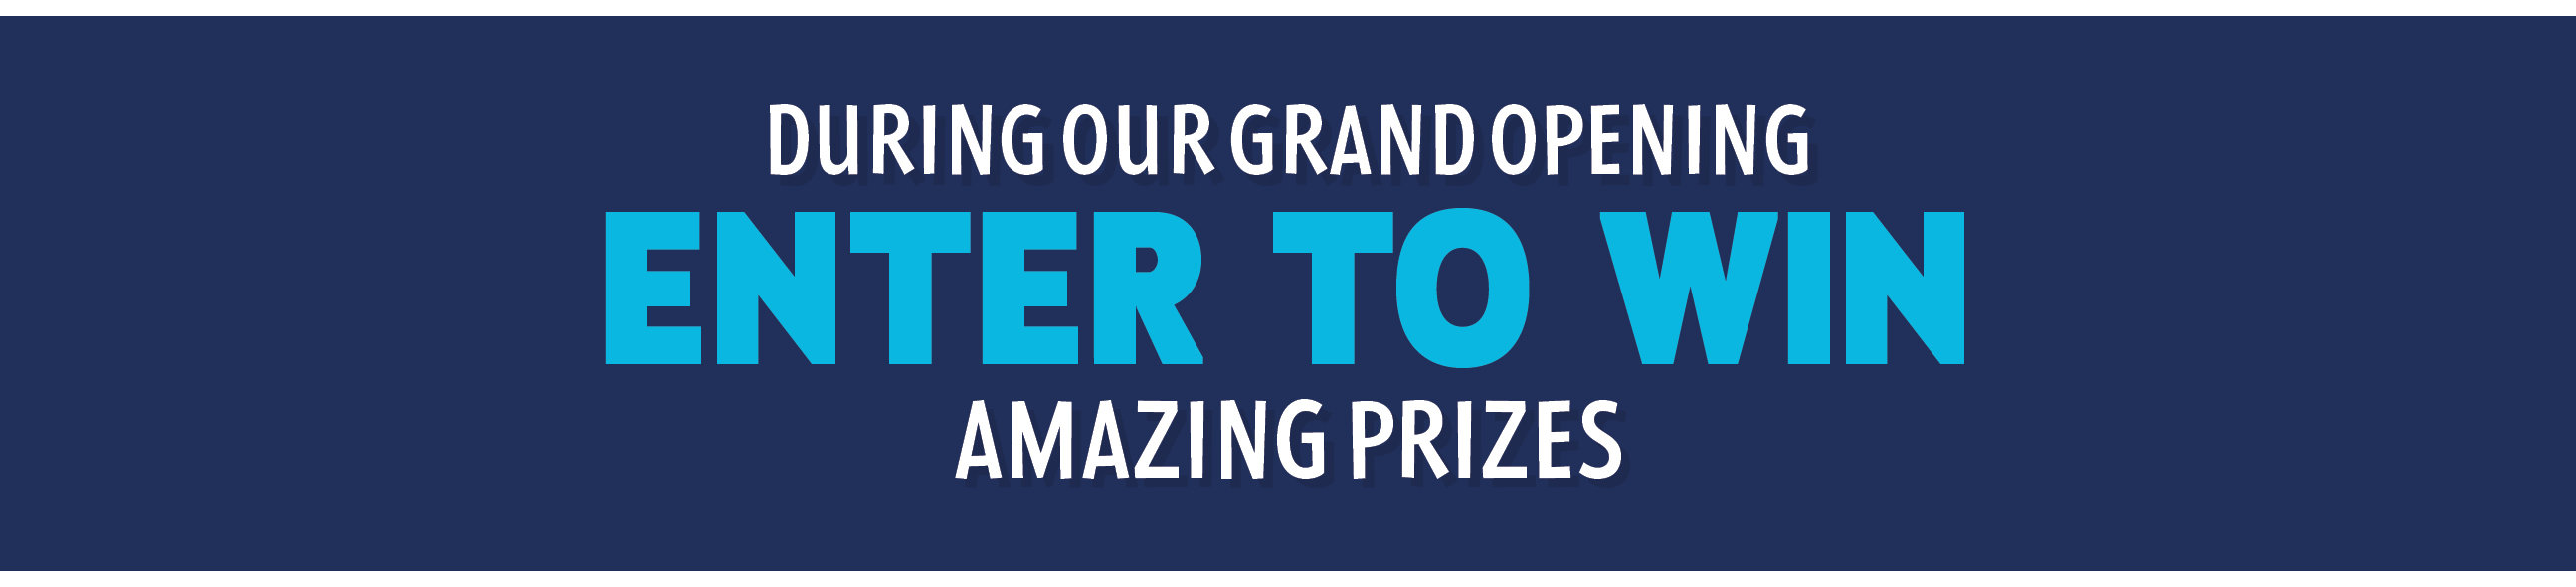 during our grand opening enter to win amazing prizes